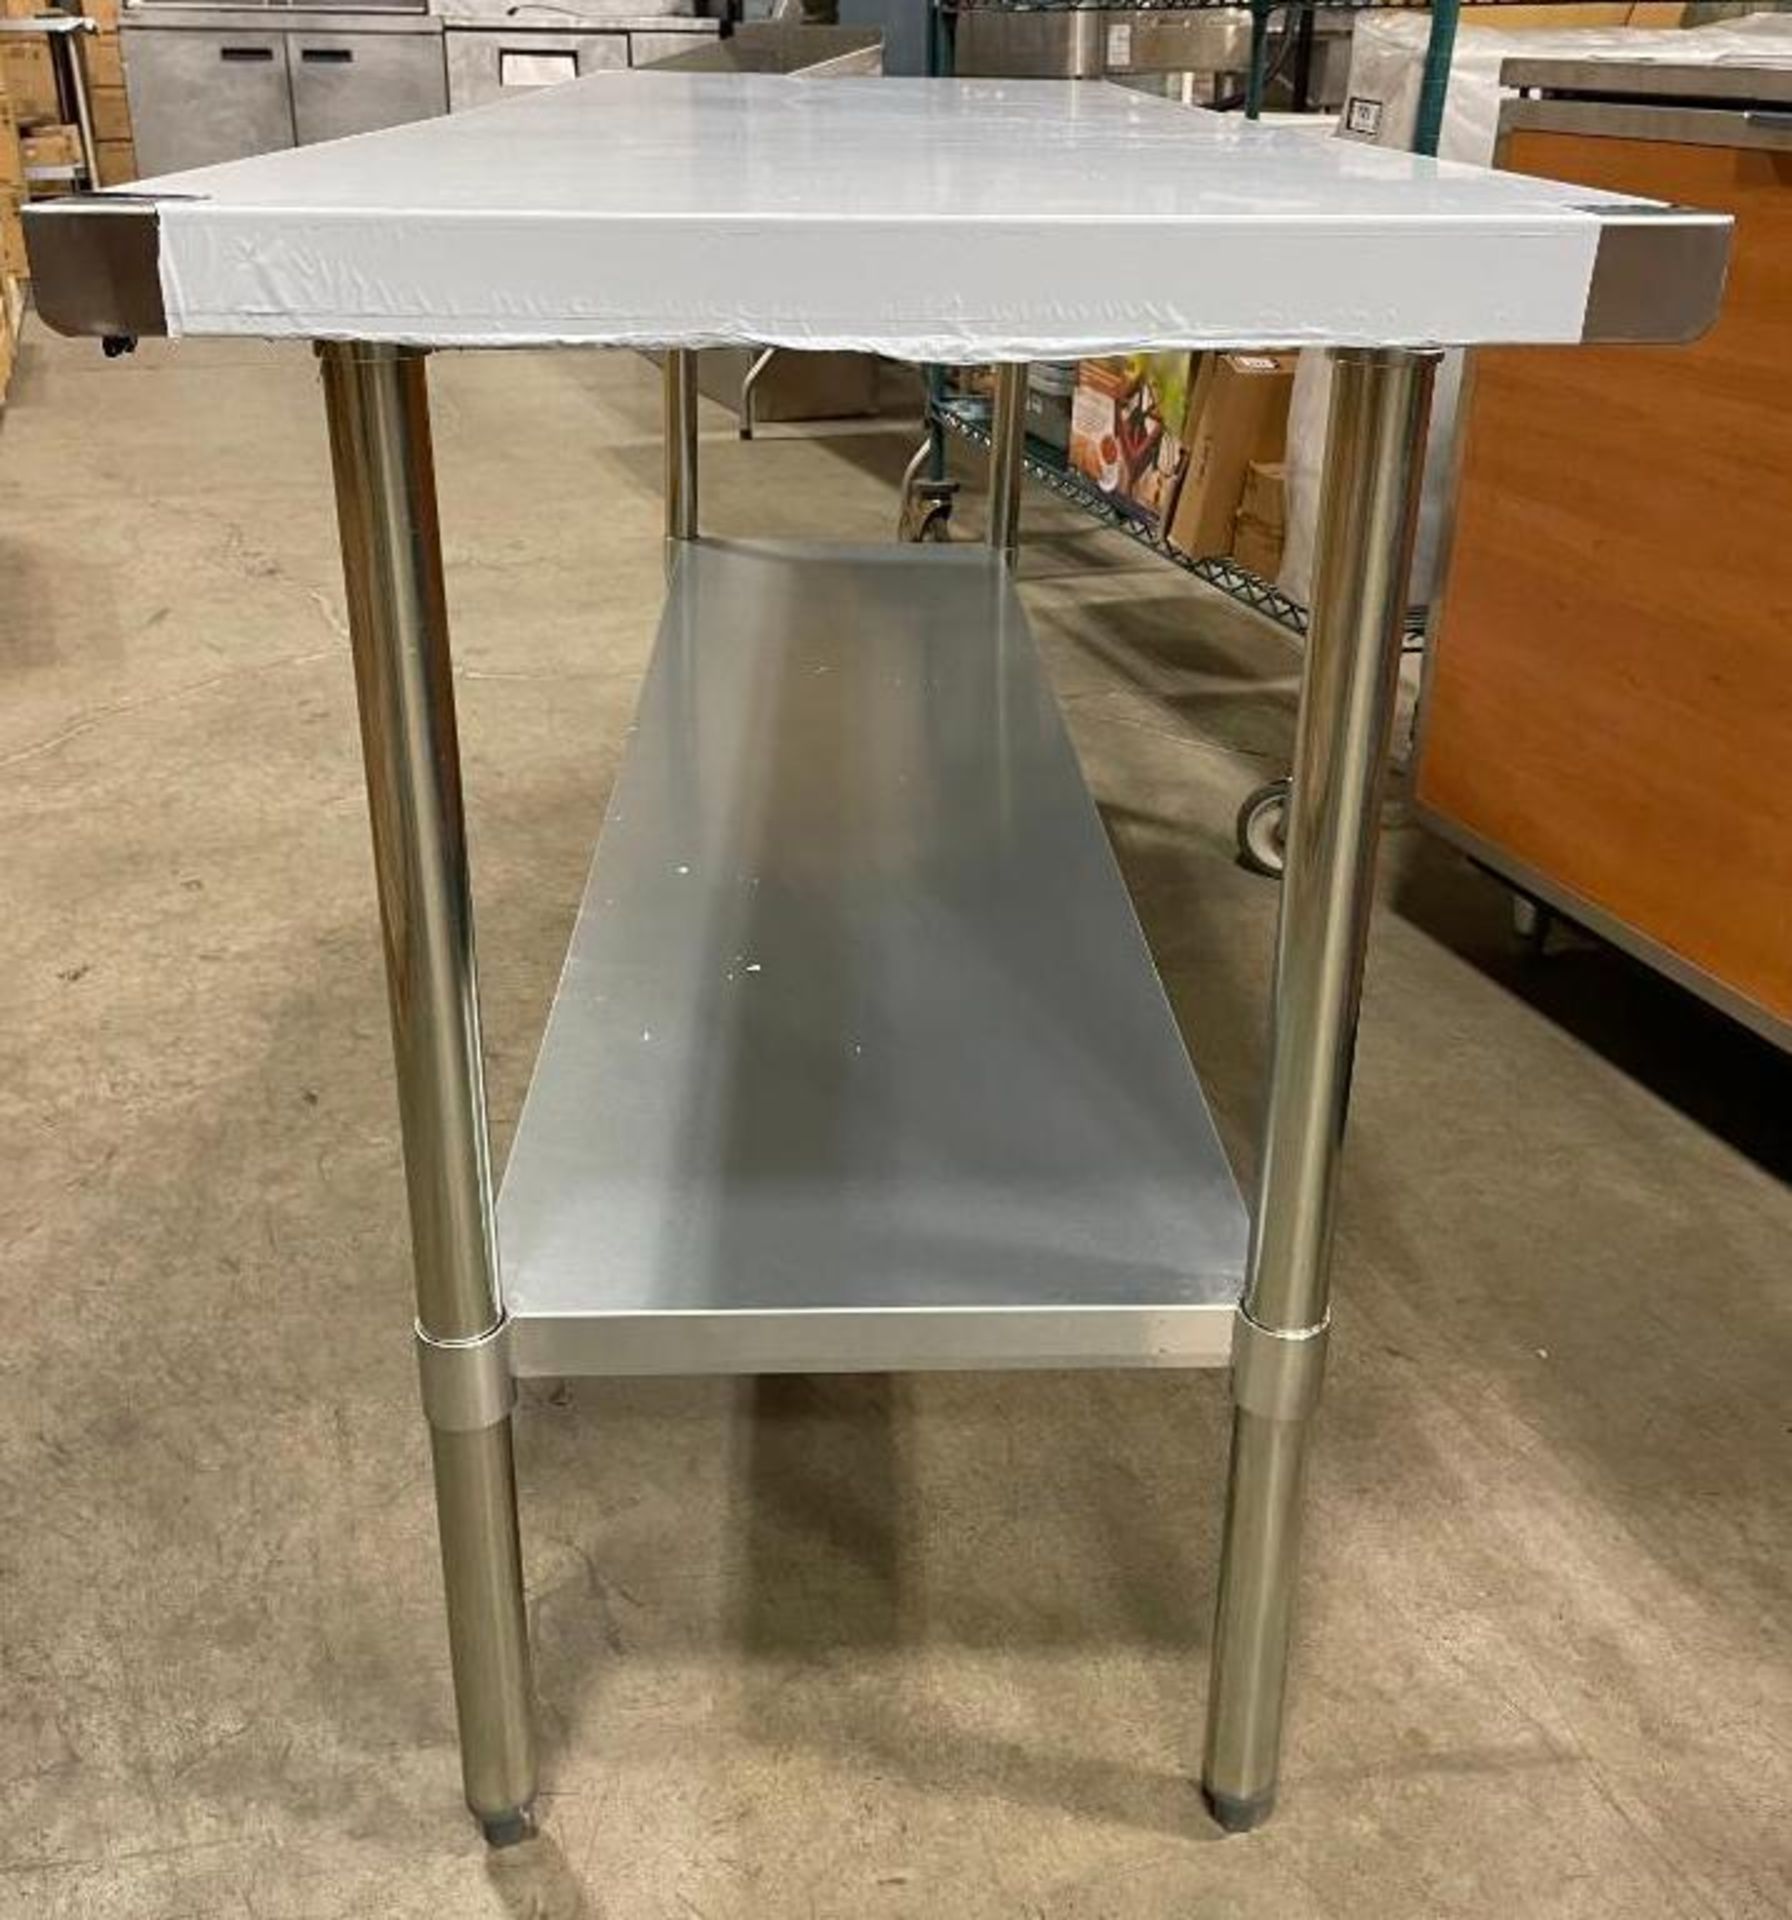 NEW 72" X 30" STAINLESS STEEL WORK TABLE - Image 3 of 4